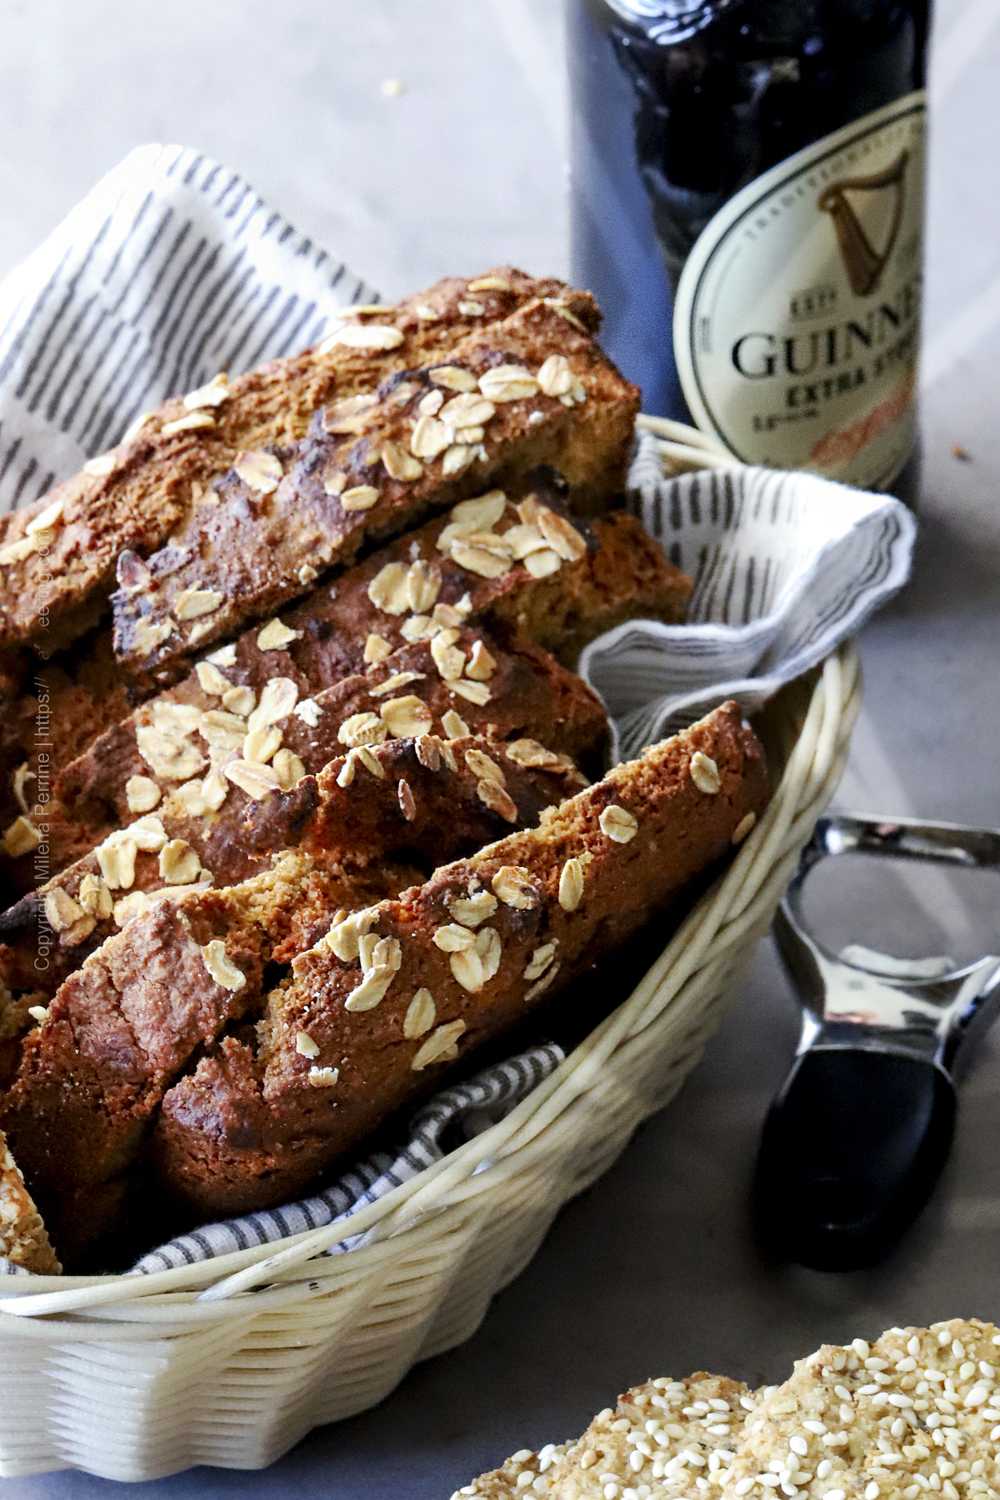 Brown bread with oats and Guinness - authentic Irish recipe for a quick beer bread. 